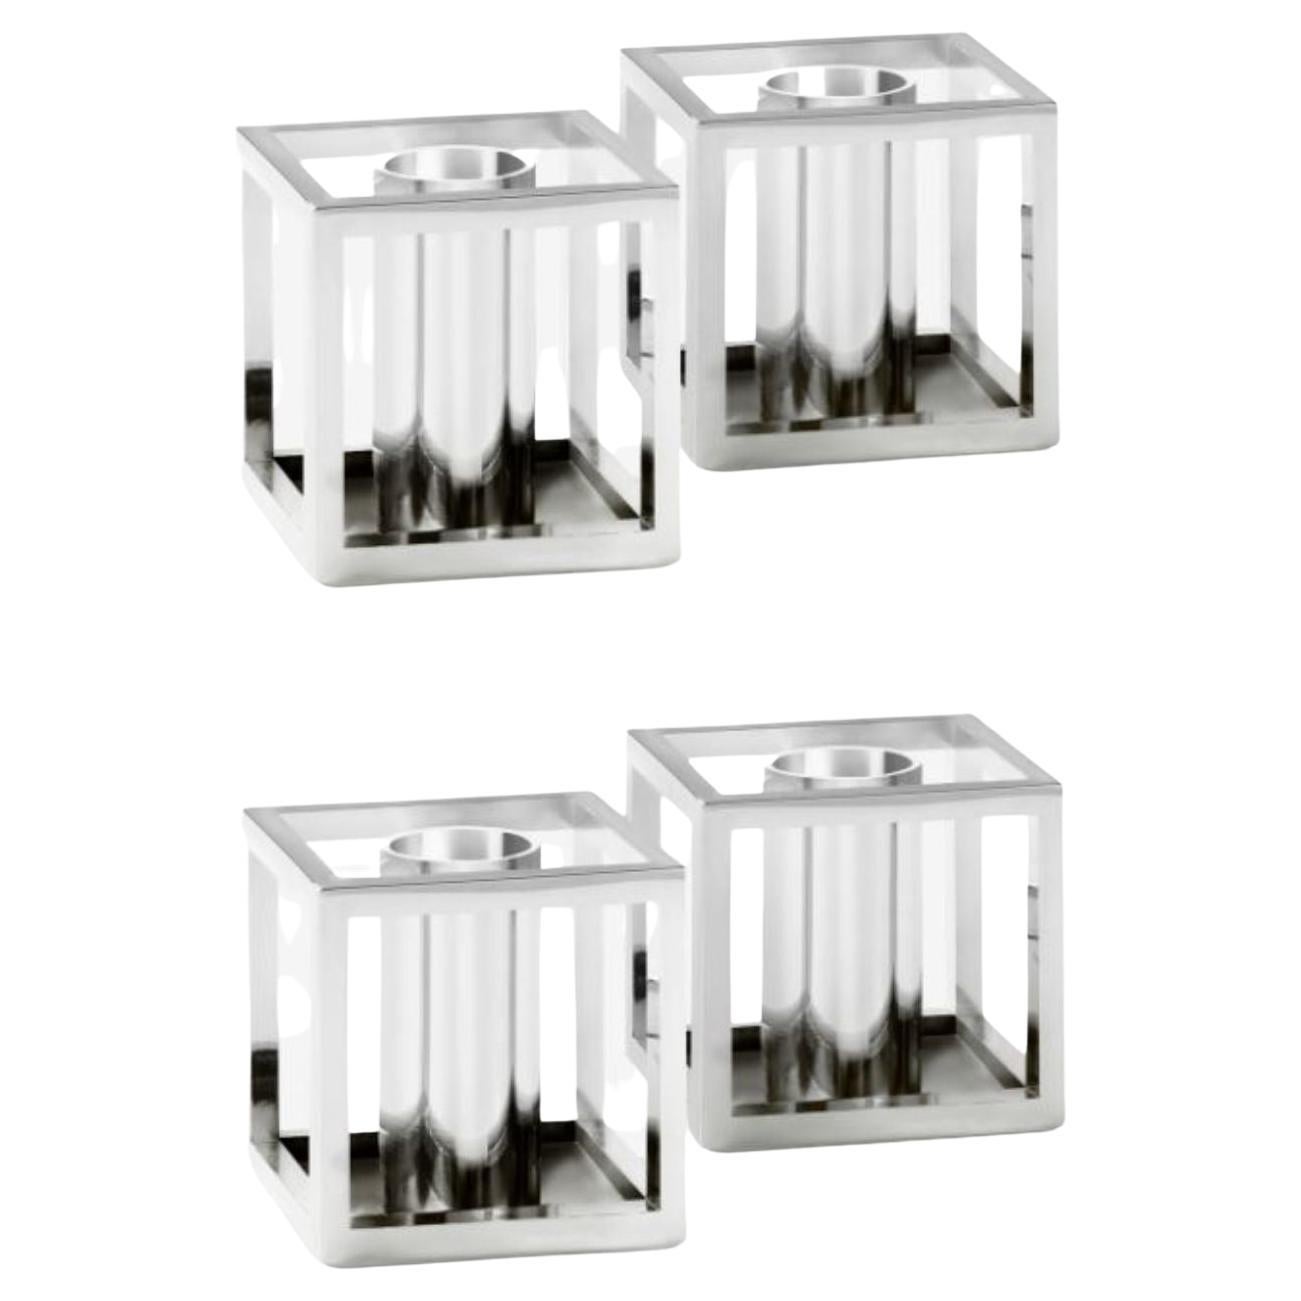 Set of 4 Nickel Plated Kubus Micro Candle Holders by Lassen For Sale